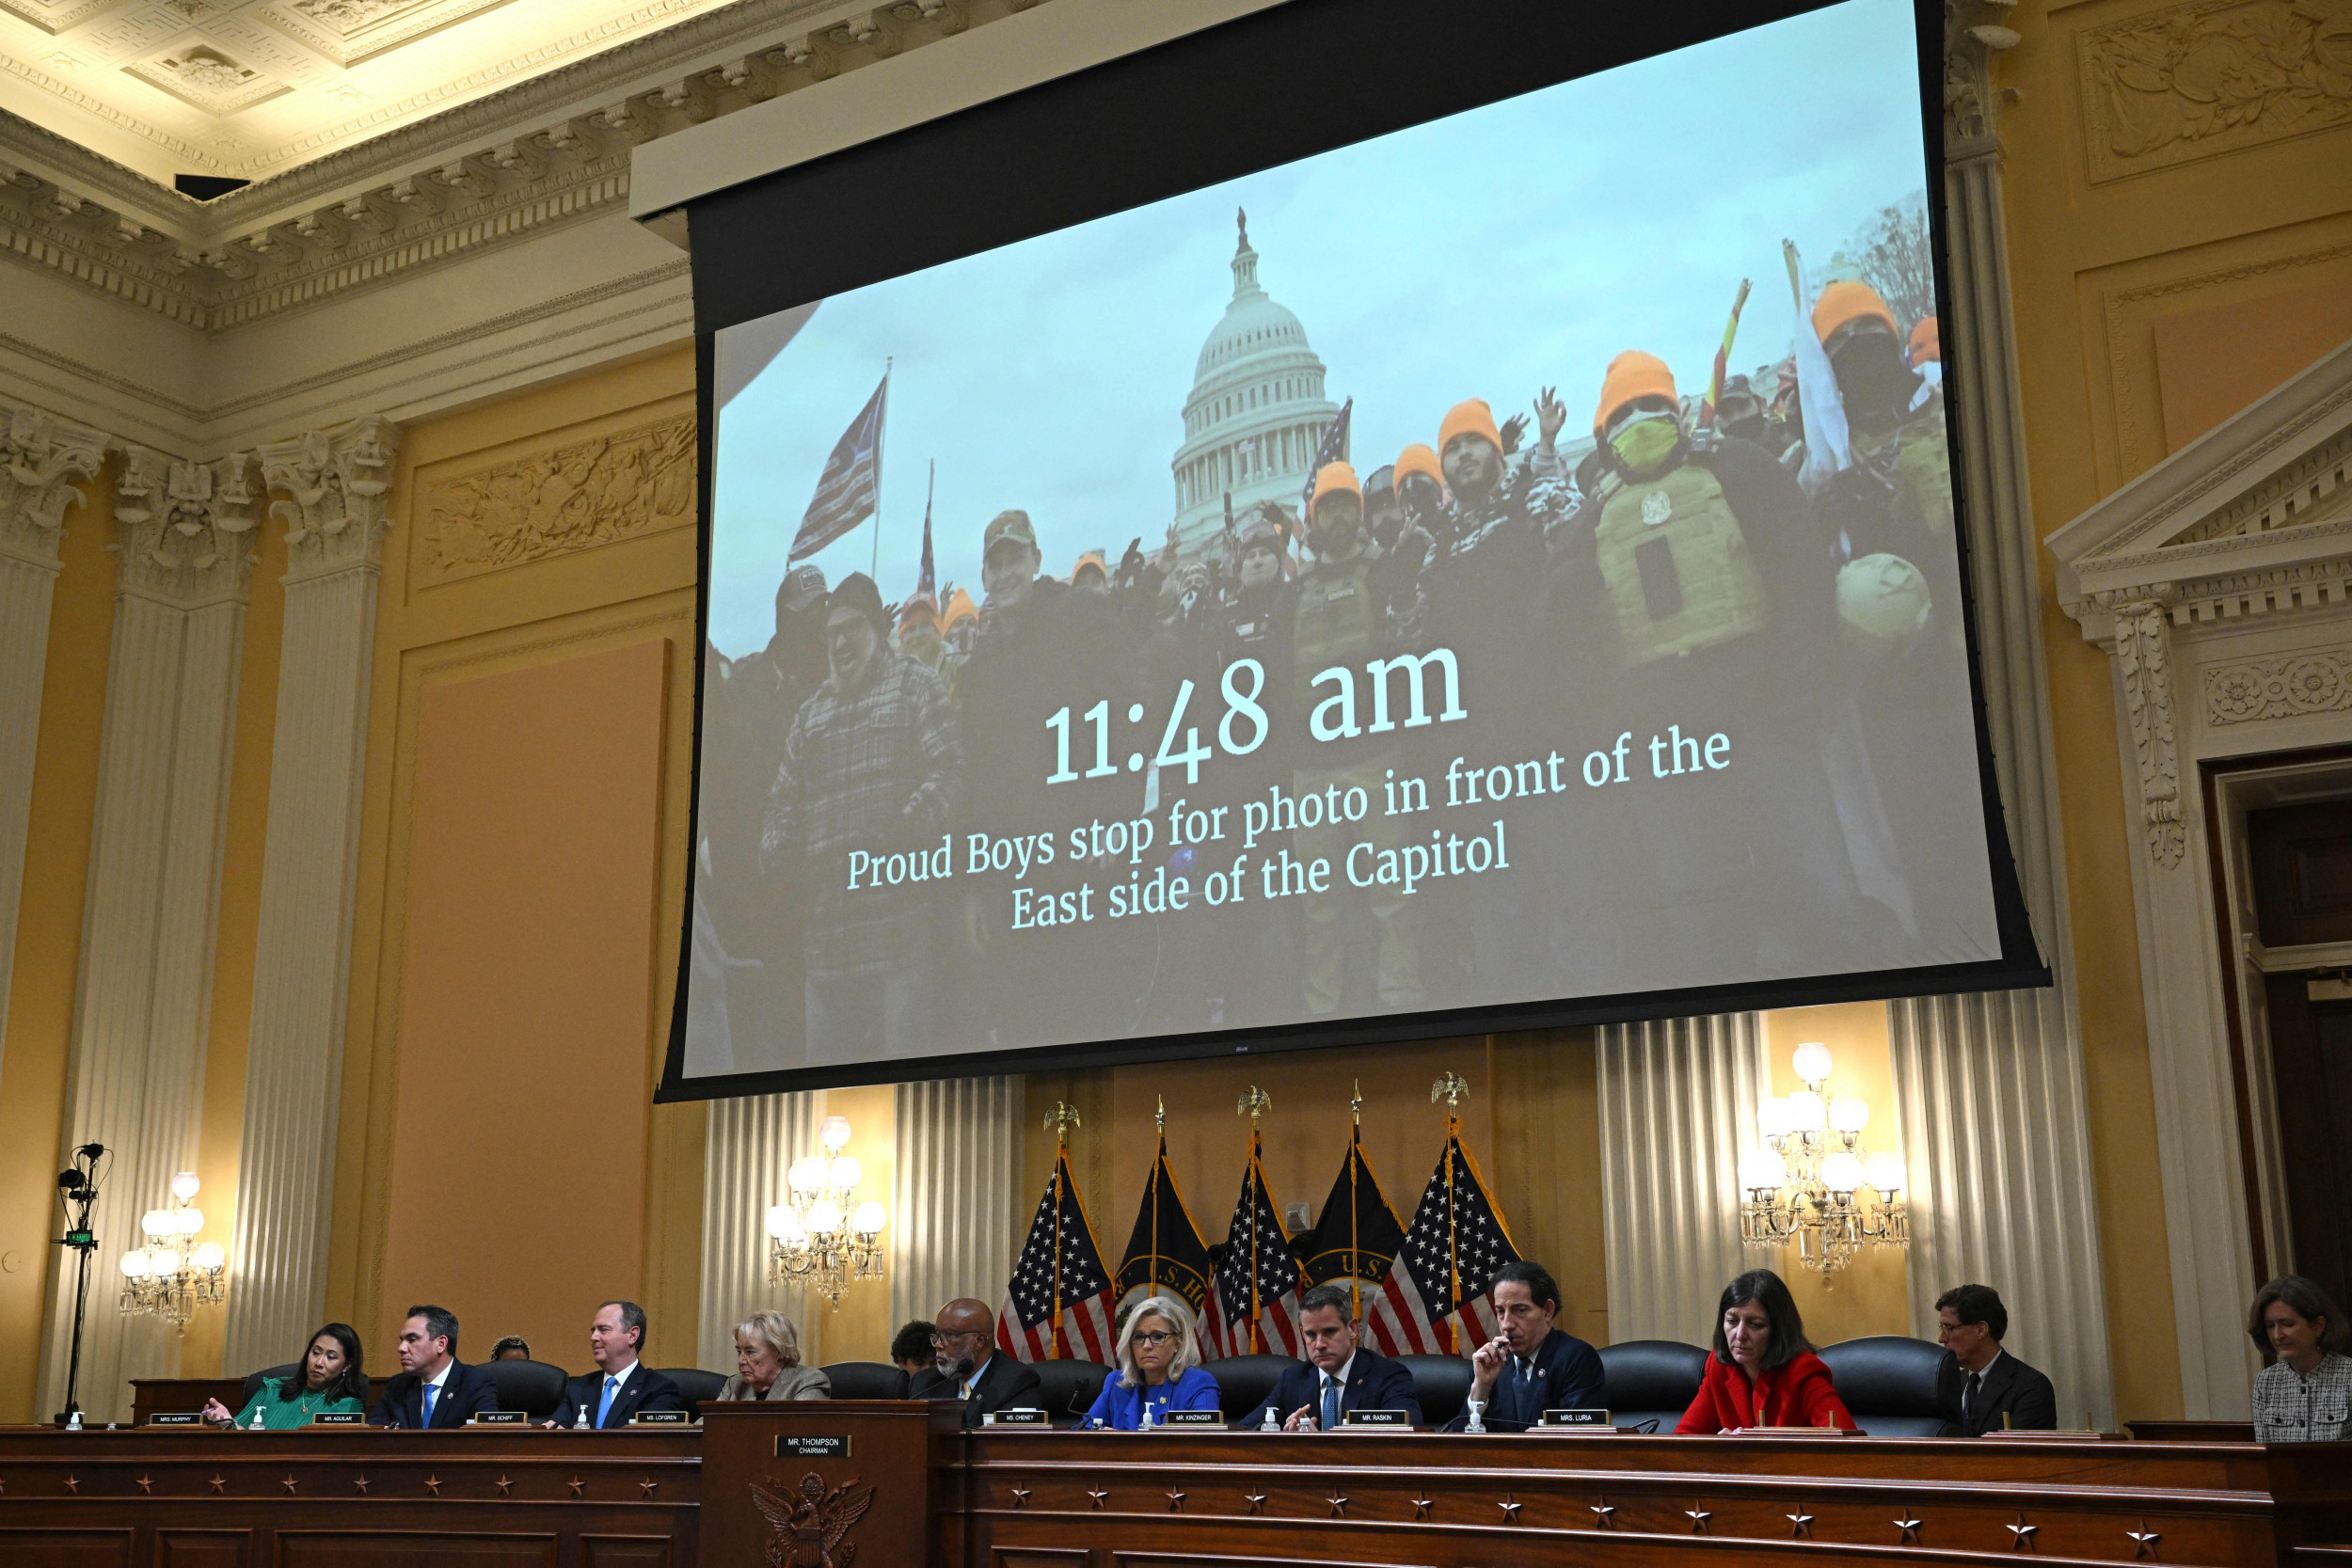 Five Things to Look Out for at Today's Jan. 6 Hearing